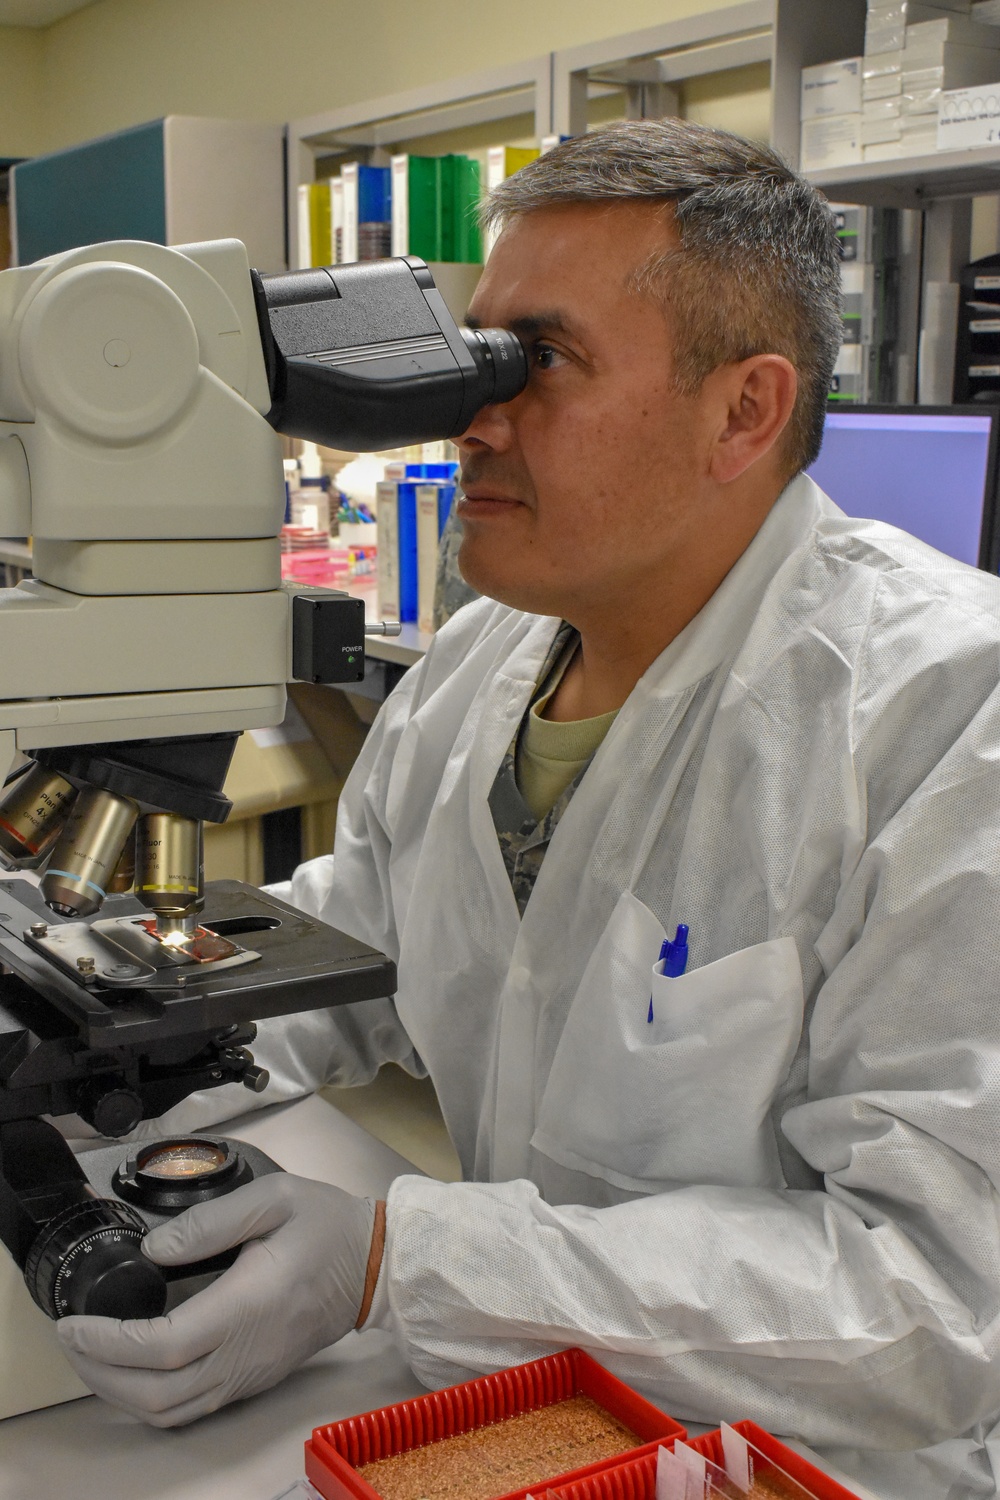 134th MDG Airman trains with active duty in lab